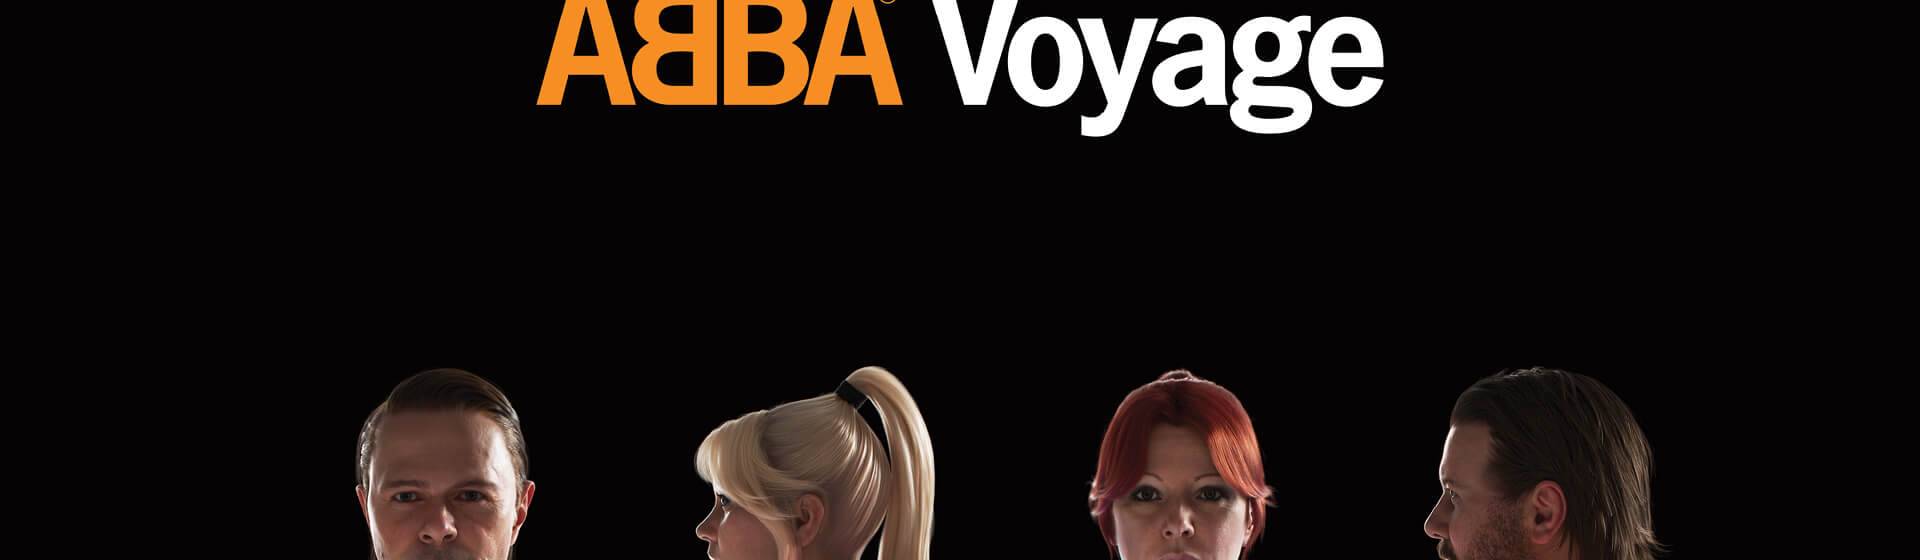 abba voyage location hotels